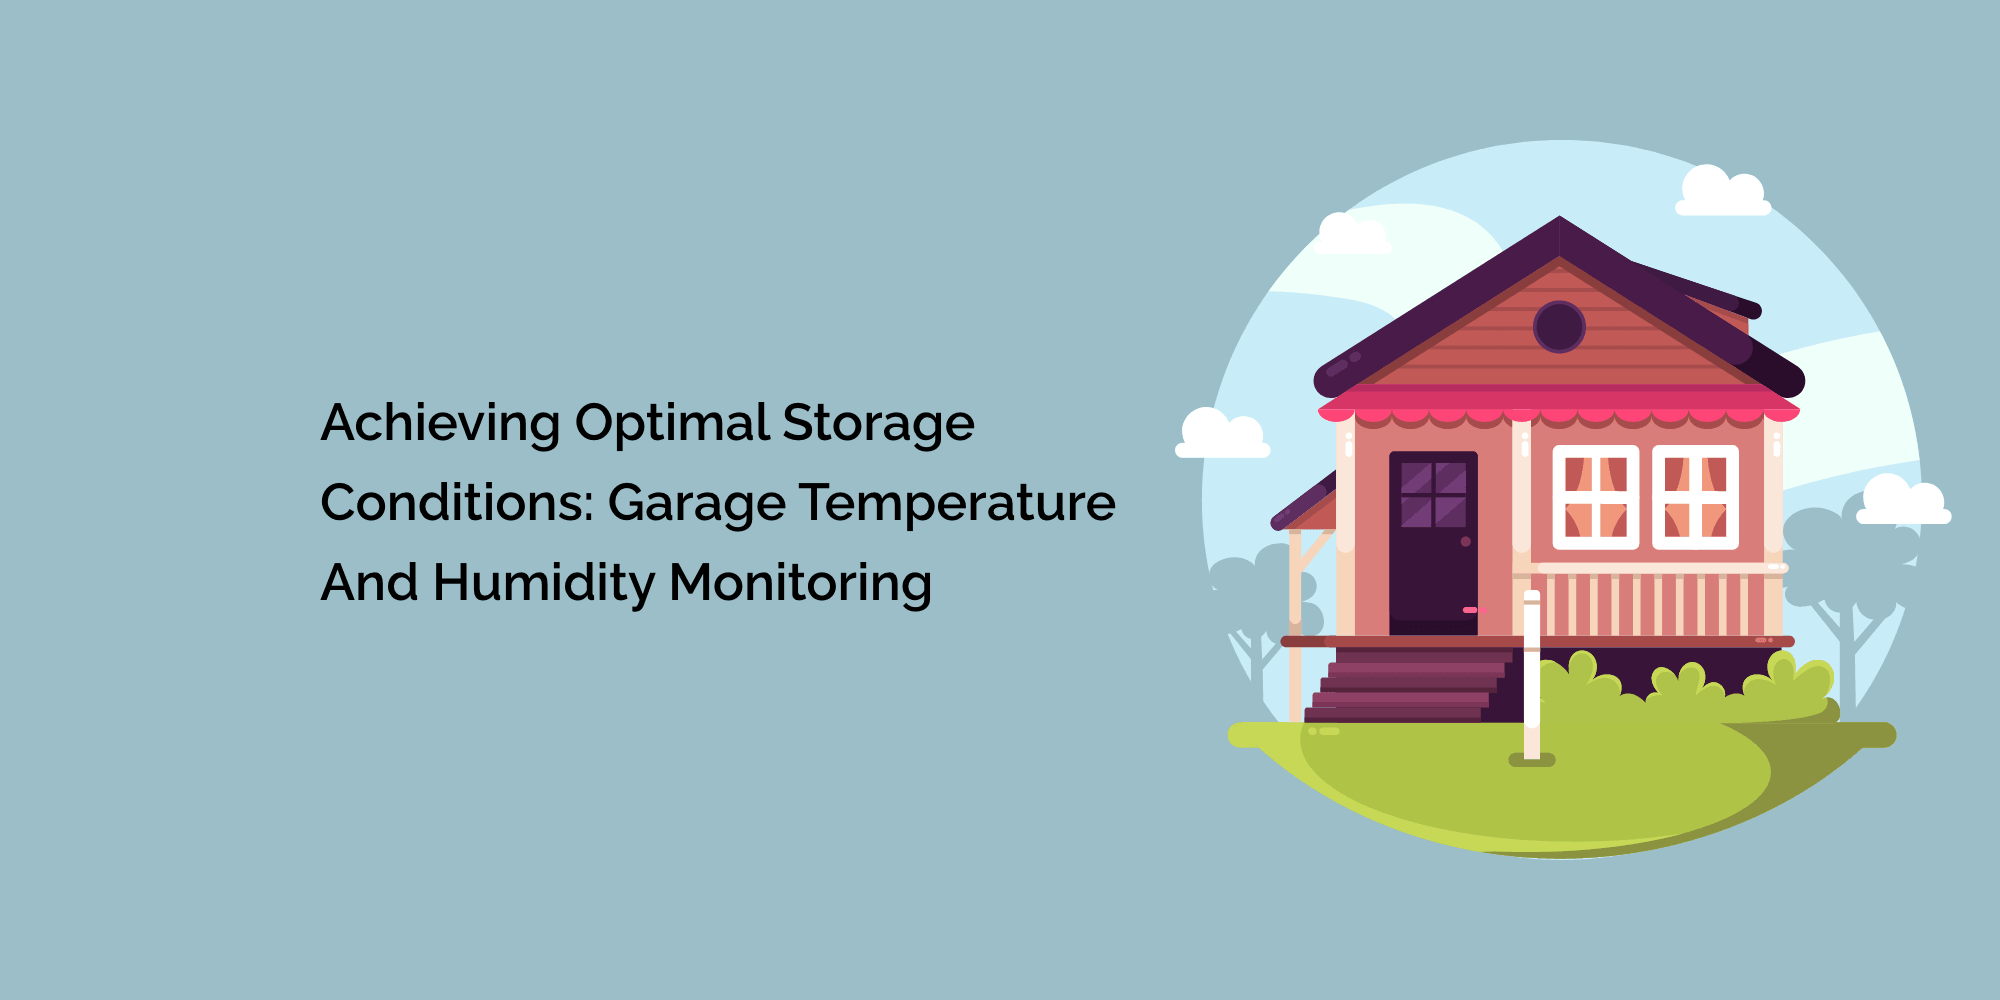 Achieving Optimal Storage Conditions: Garage Temperature and Humidity Monitoring